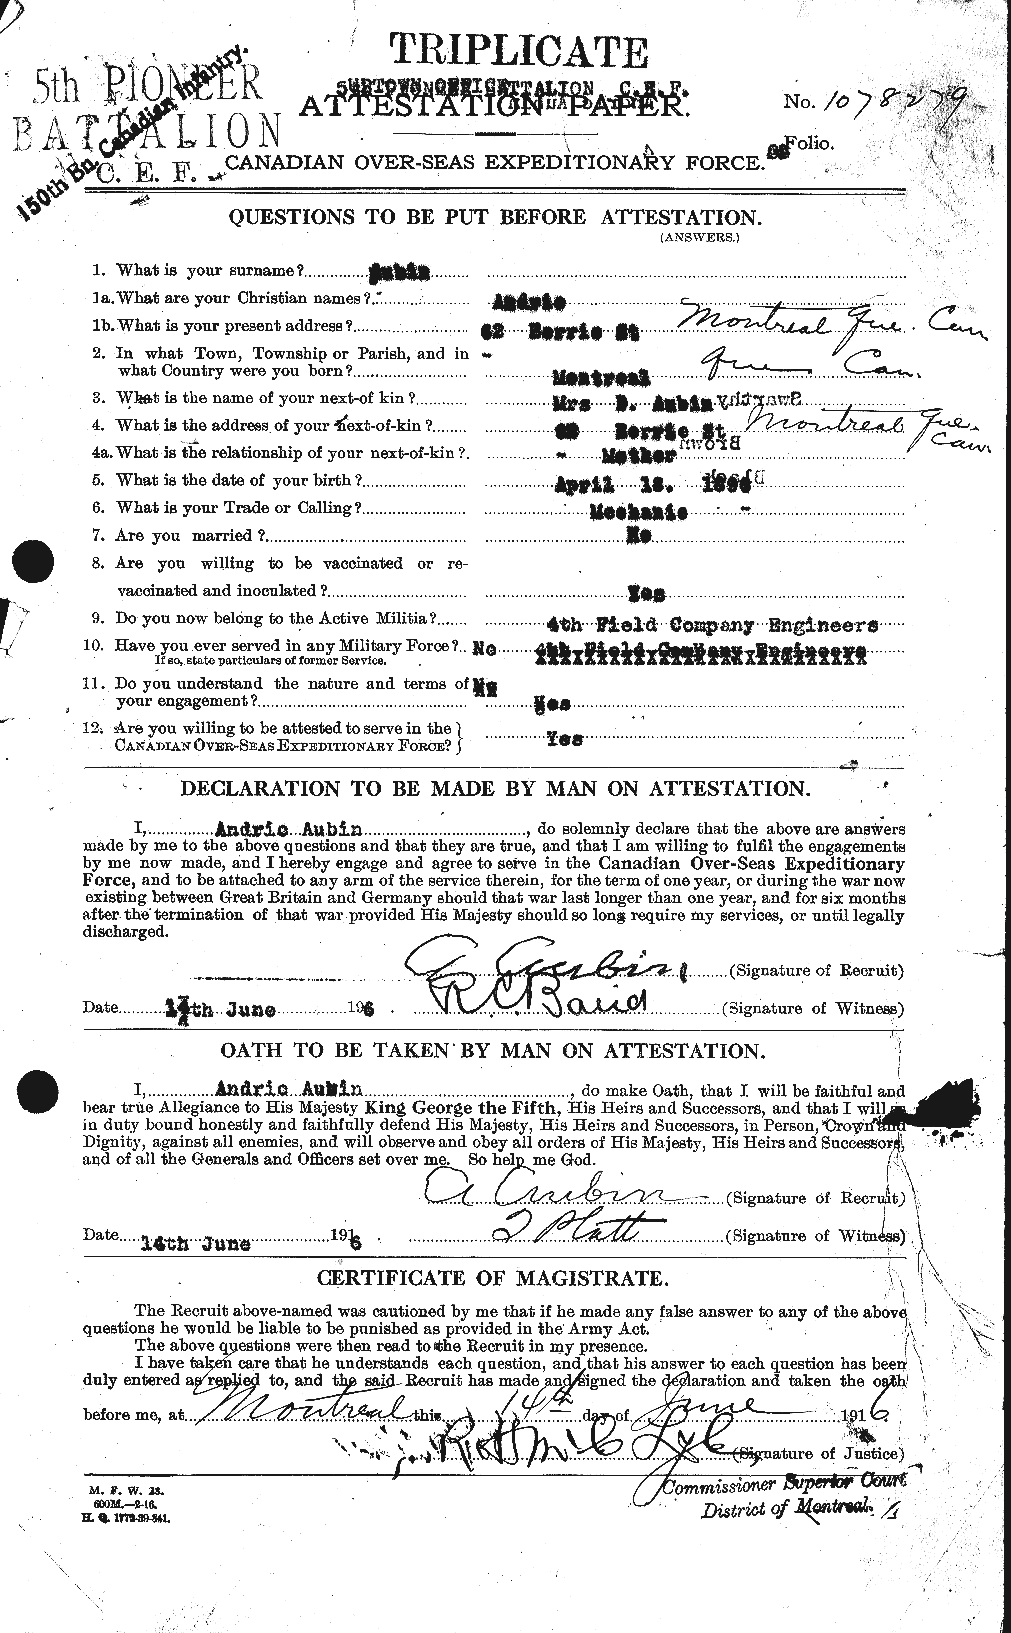 Personnel Records of the First World War - CEF 223885a